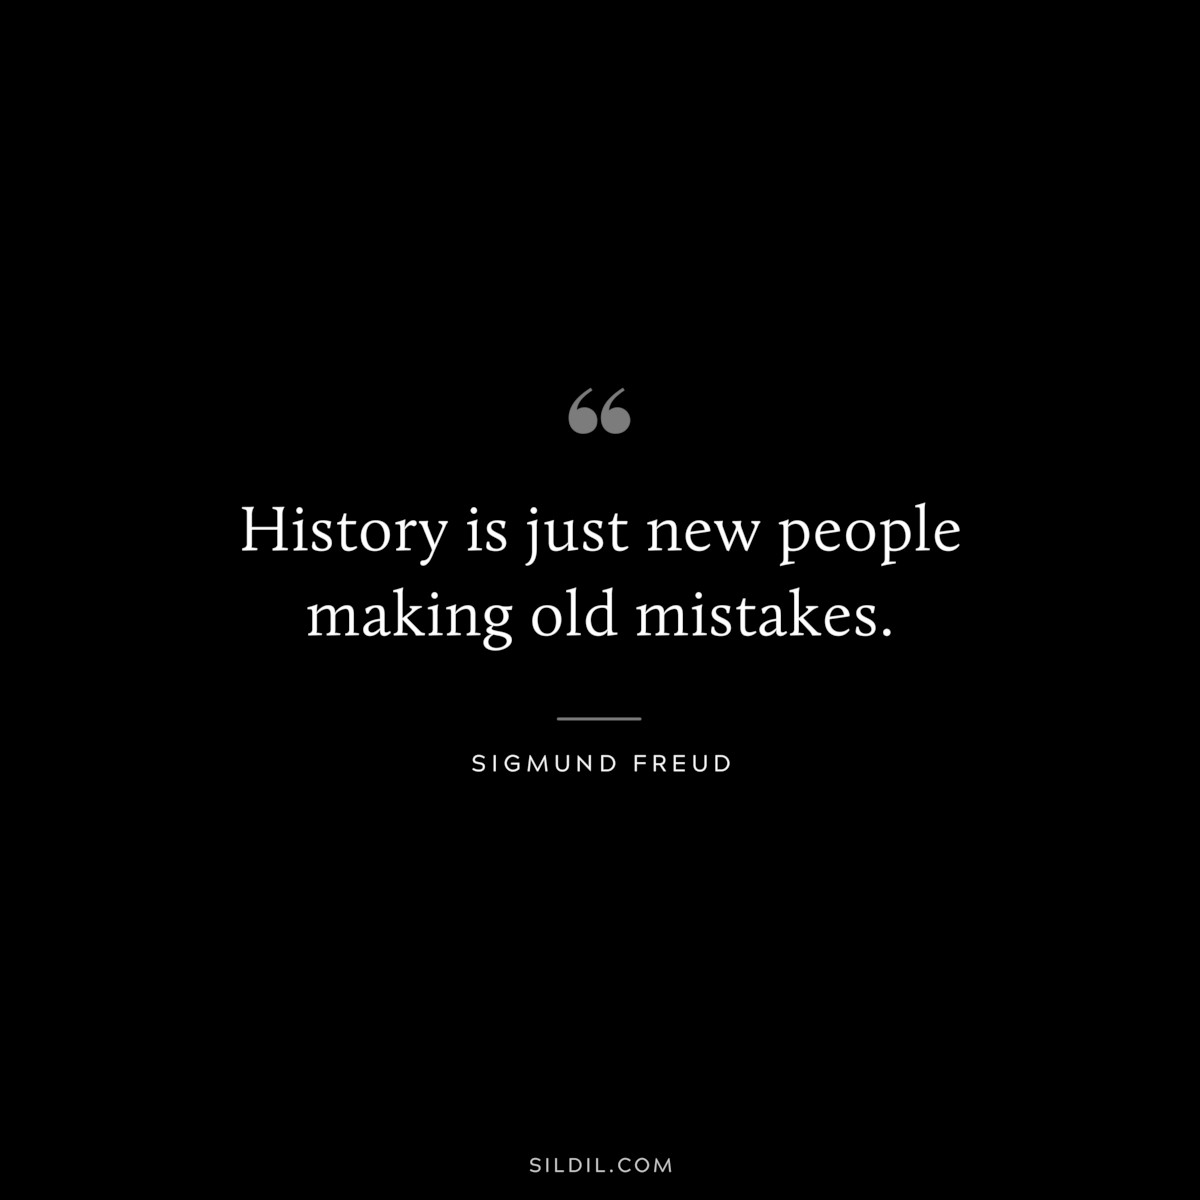 History is just new people making old mistakes. ― Sigmund Frued